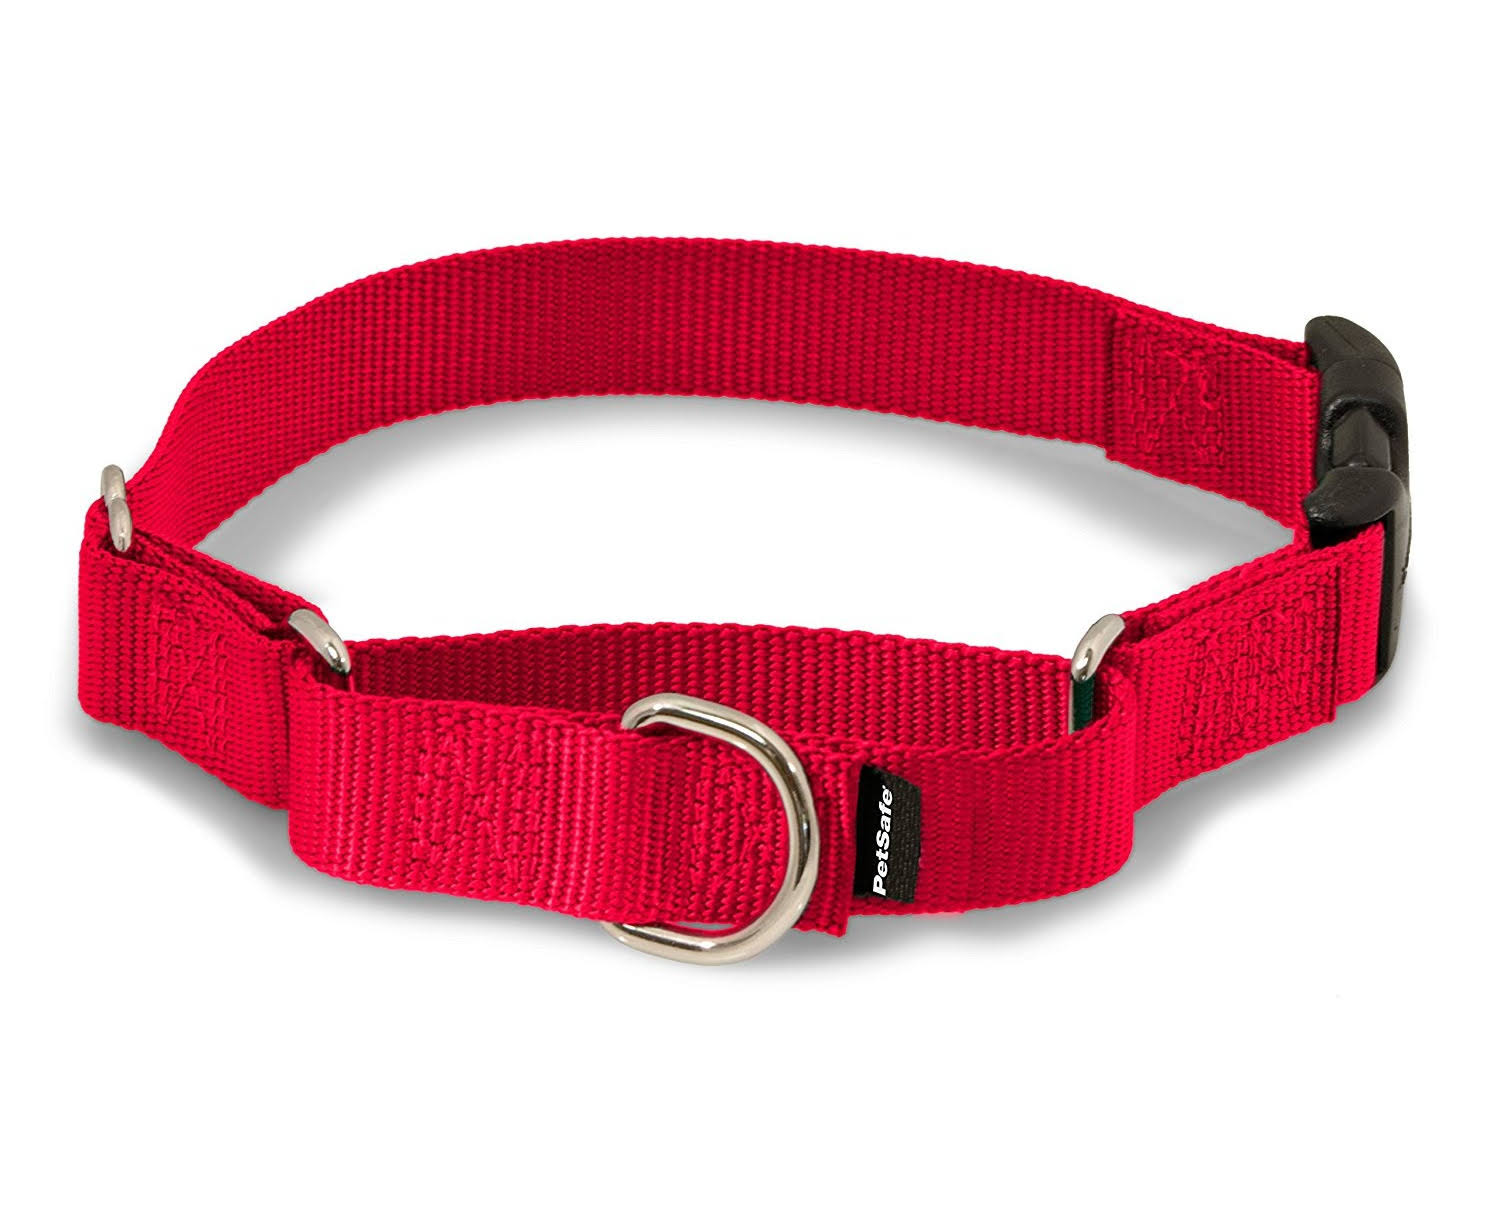 PetSafe Martingale Collar Dog Buckle - Large, Red, Quick Snap, 1"